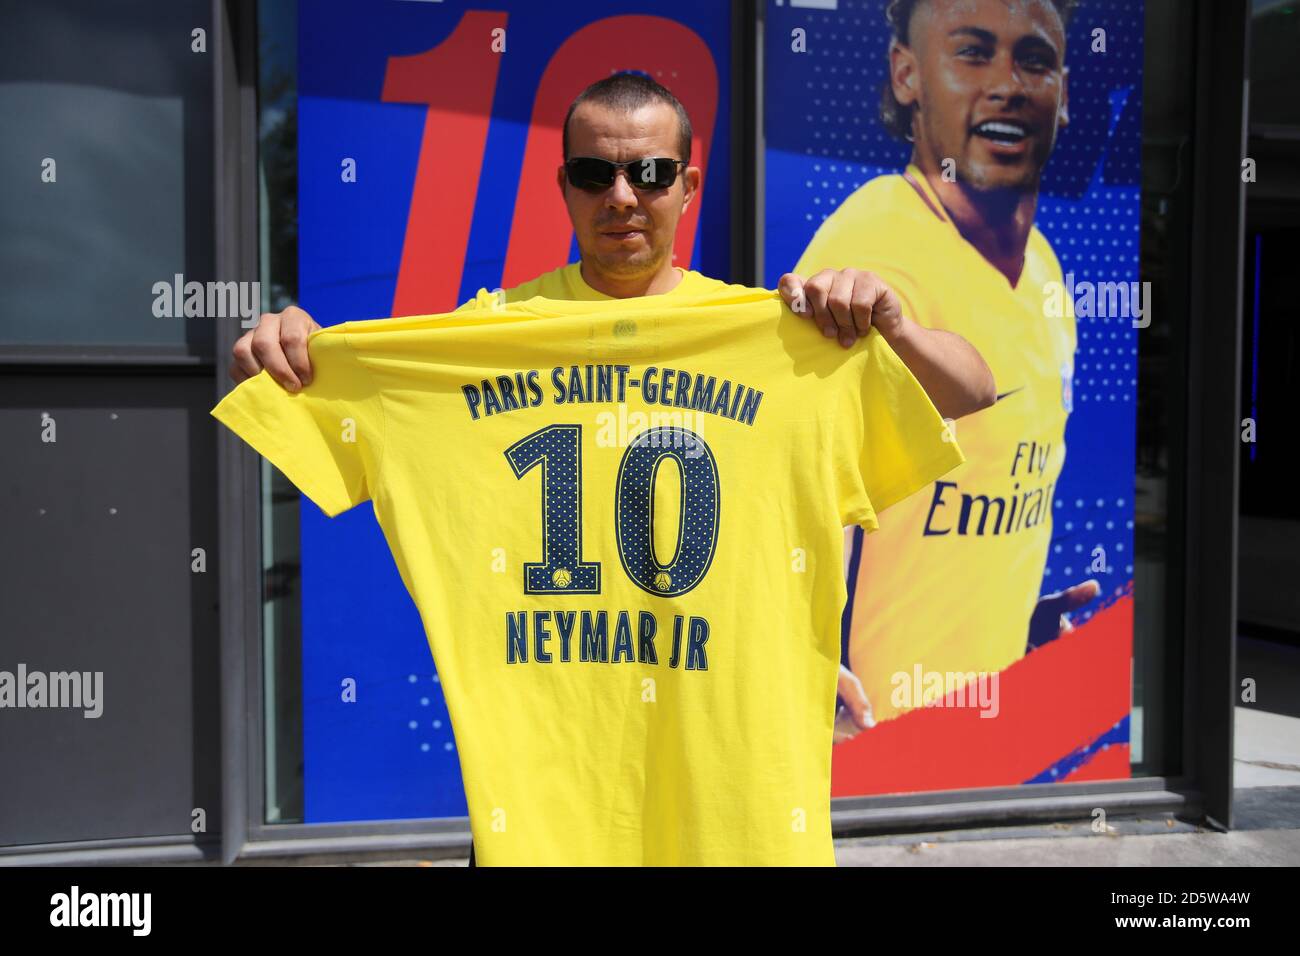 Paris Saint-Germain's fan holding up a shirt with new signing Neymar's name on prior to the match Stock Photo